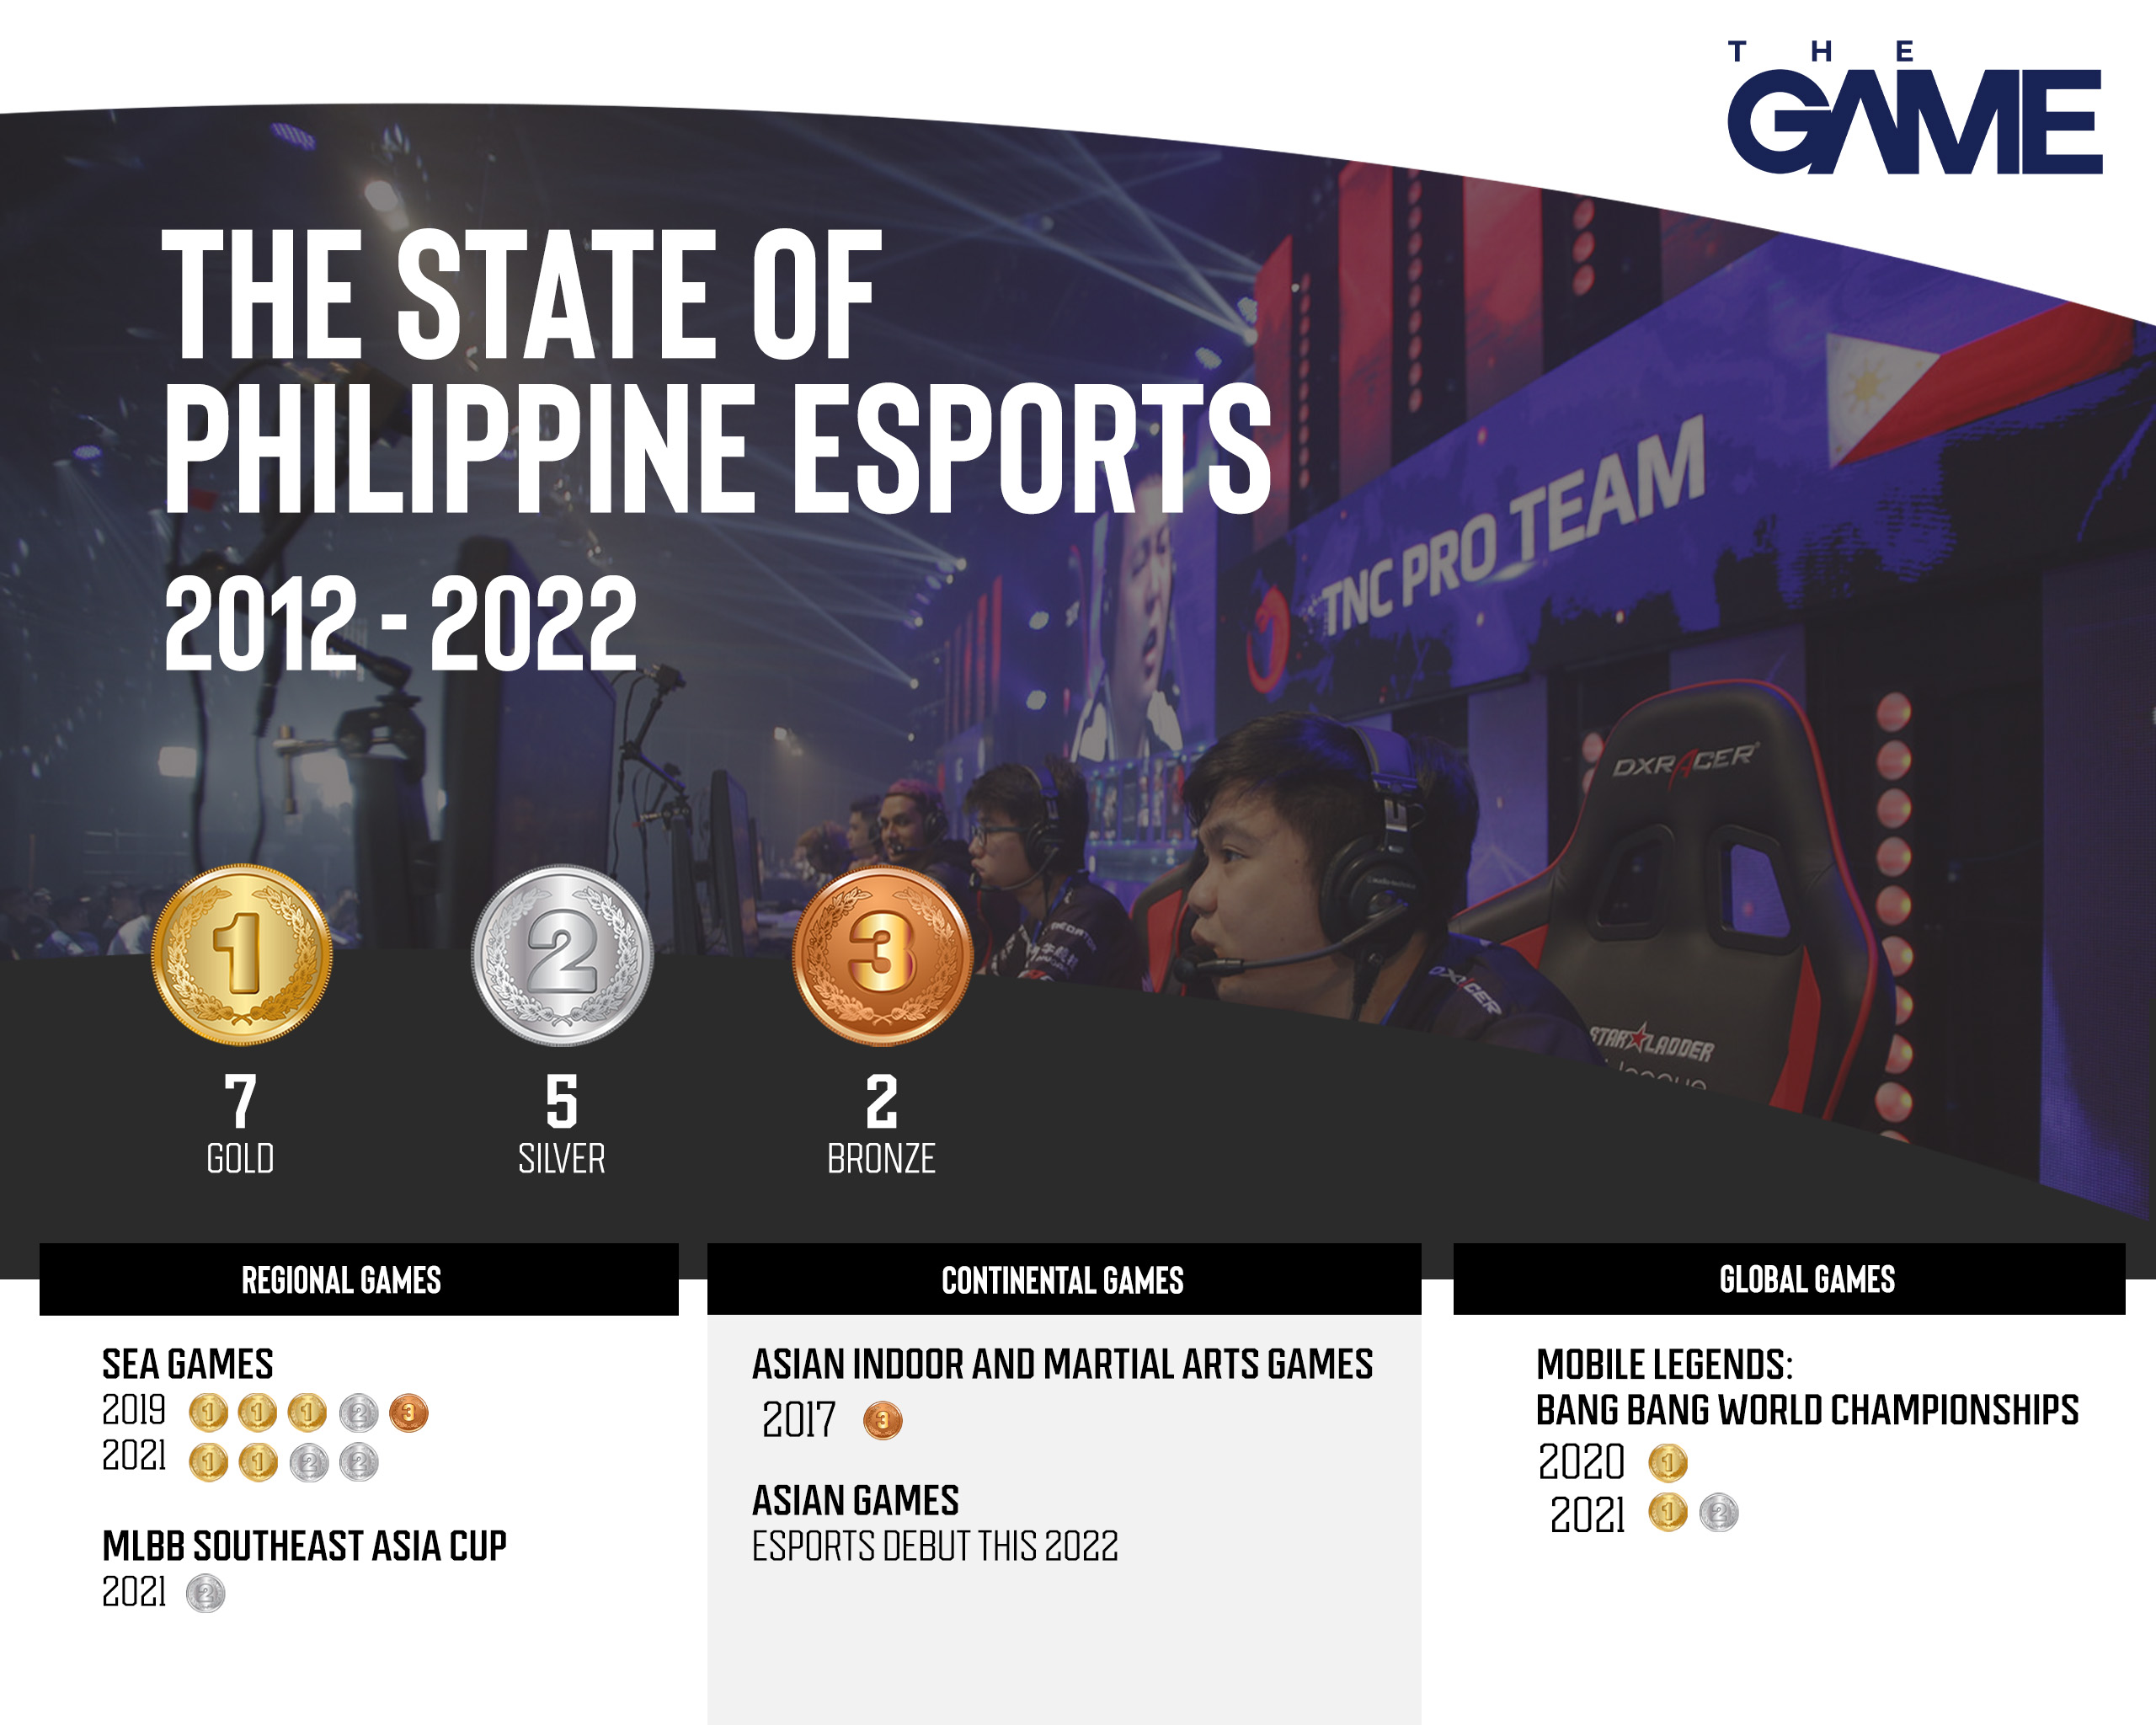 The Philippines' esports medals from 2012 to 2022.